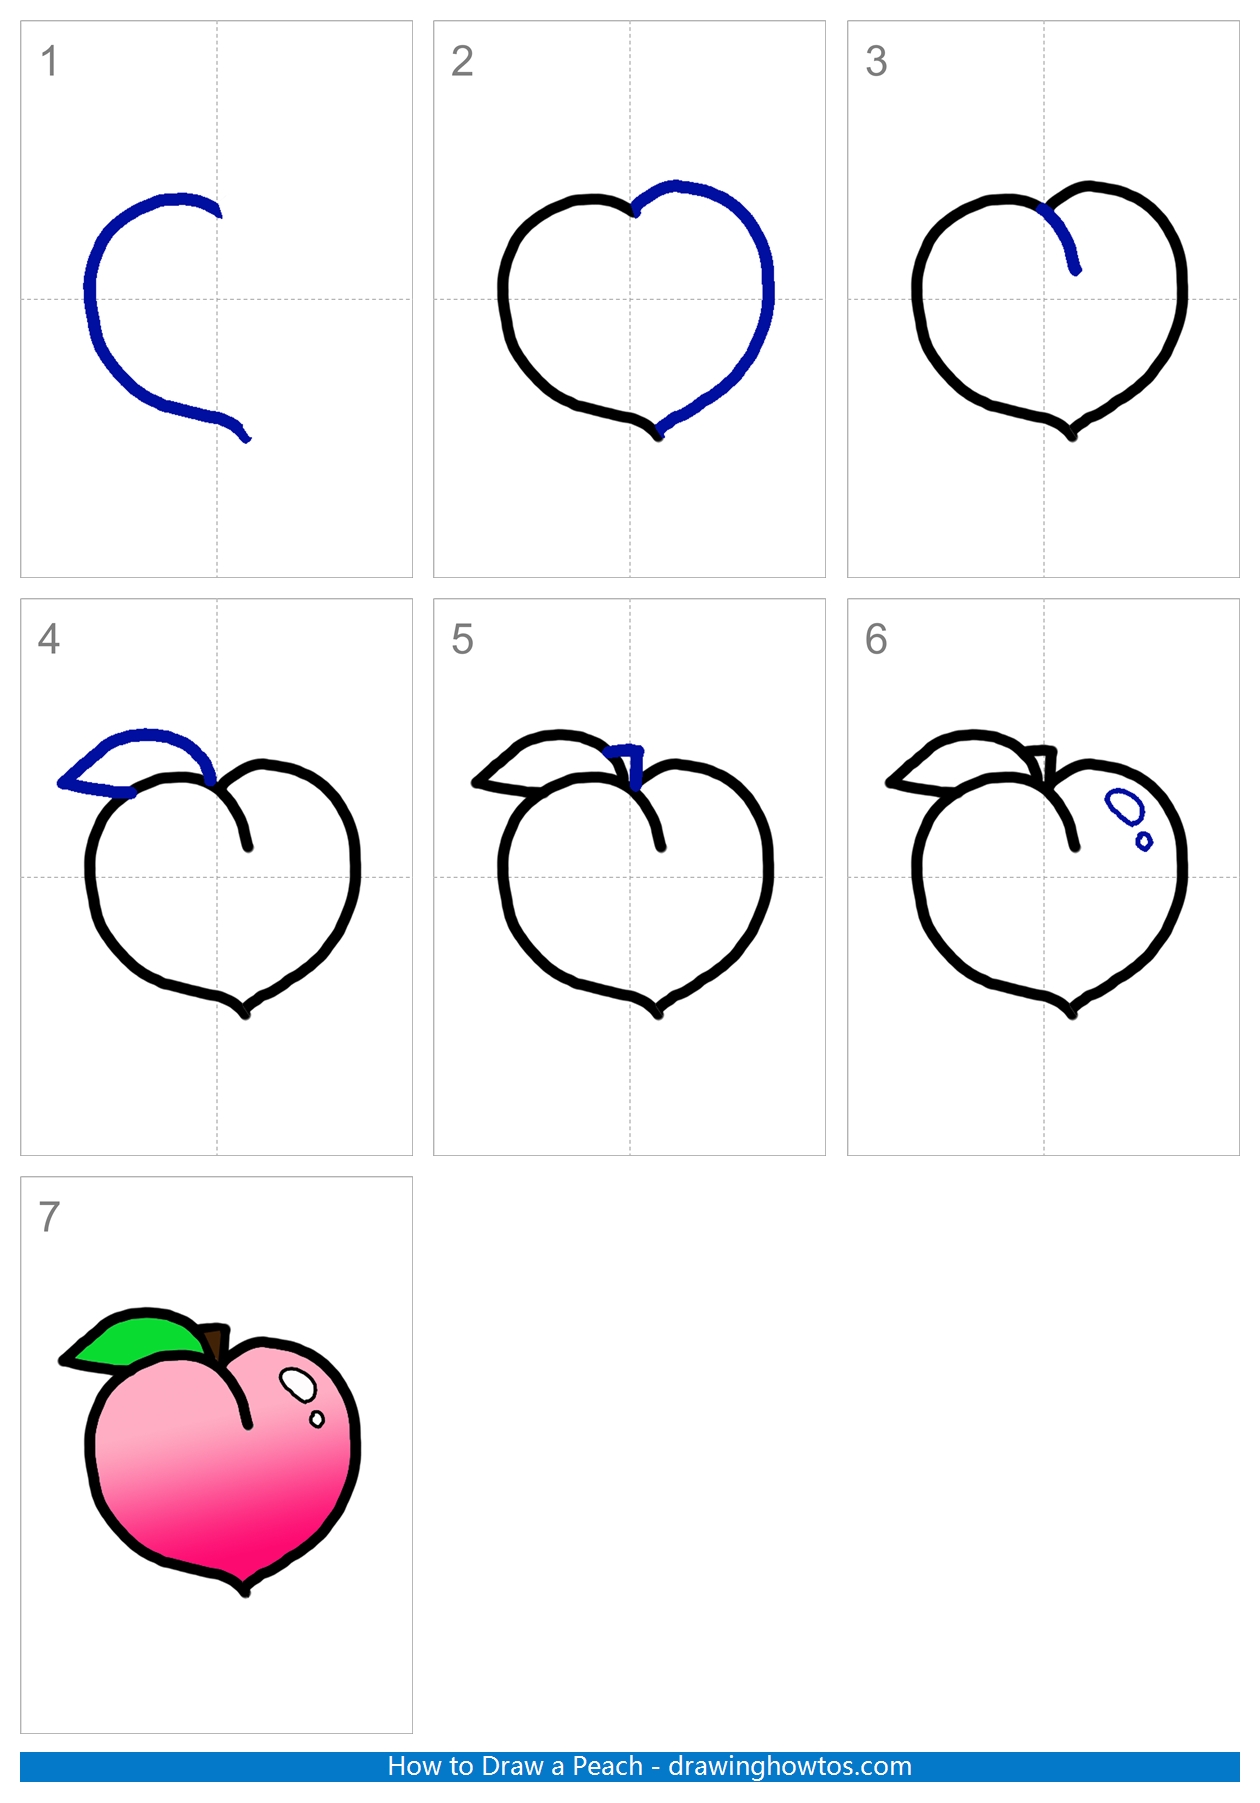 How to Draw a Peach Step by Step